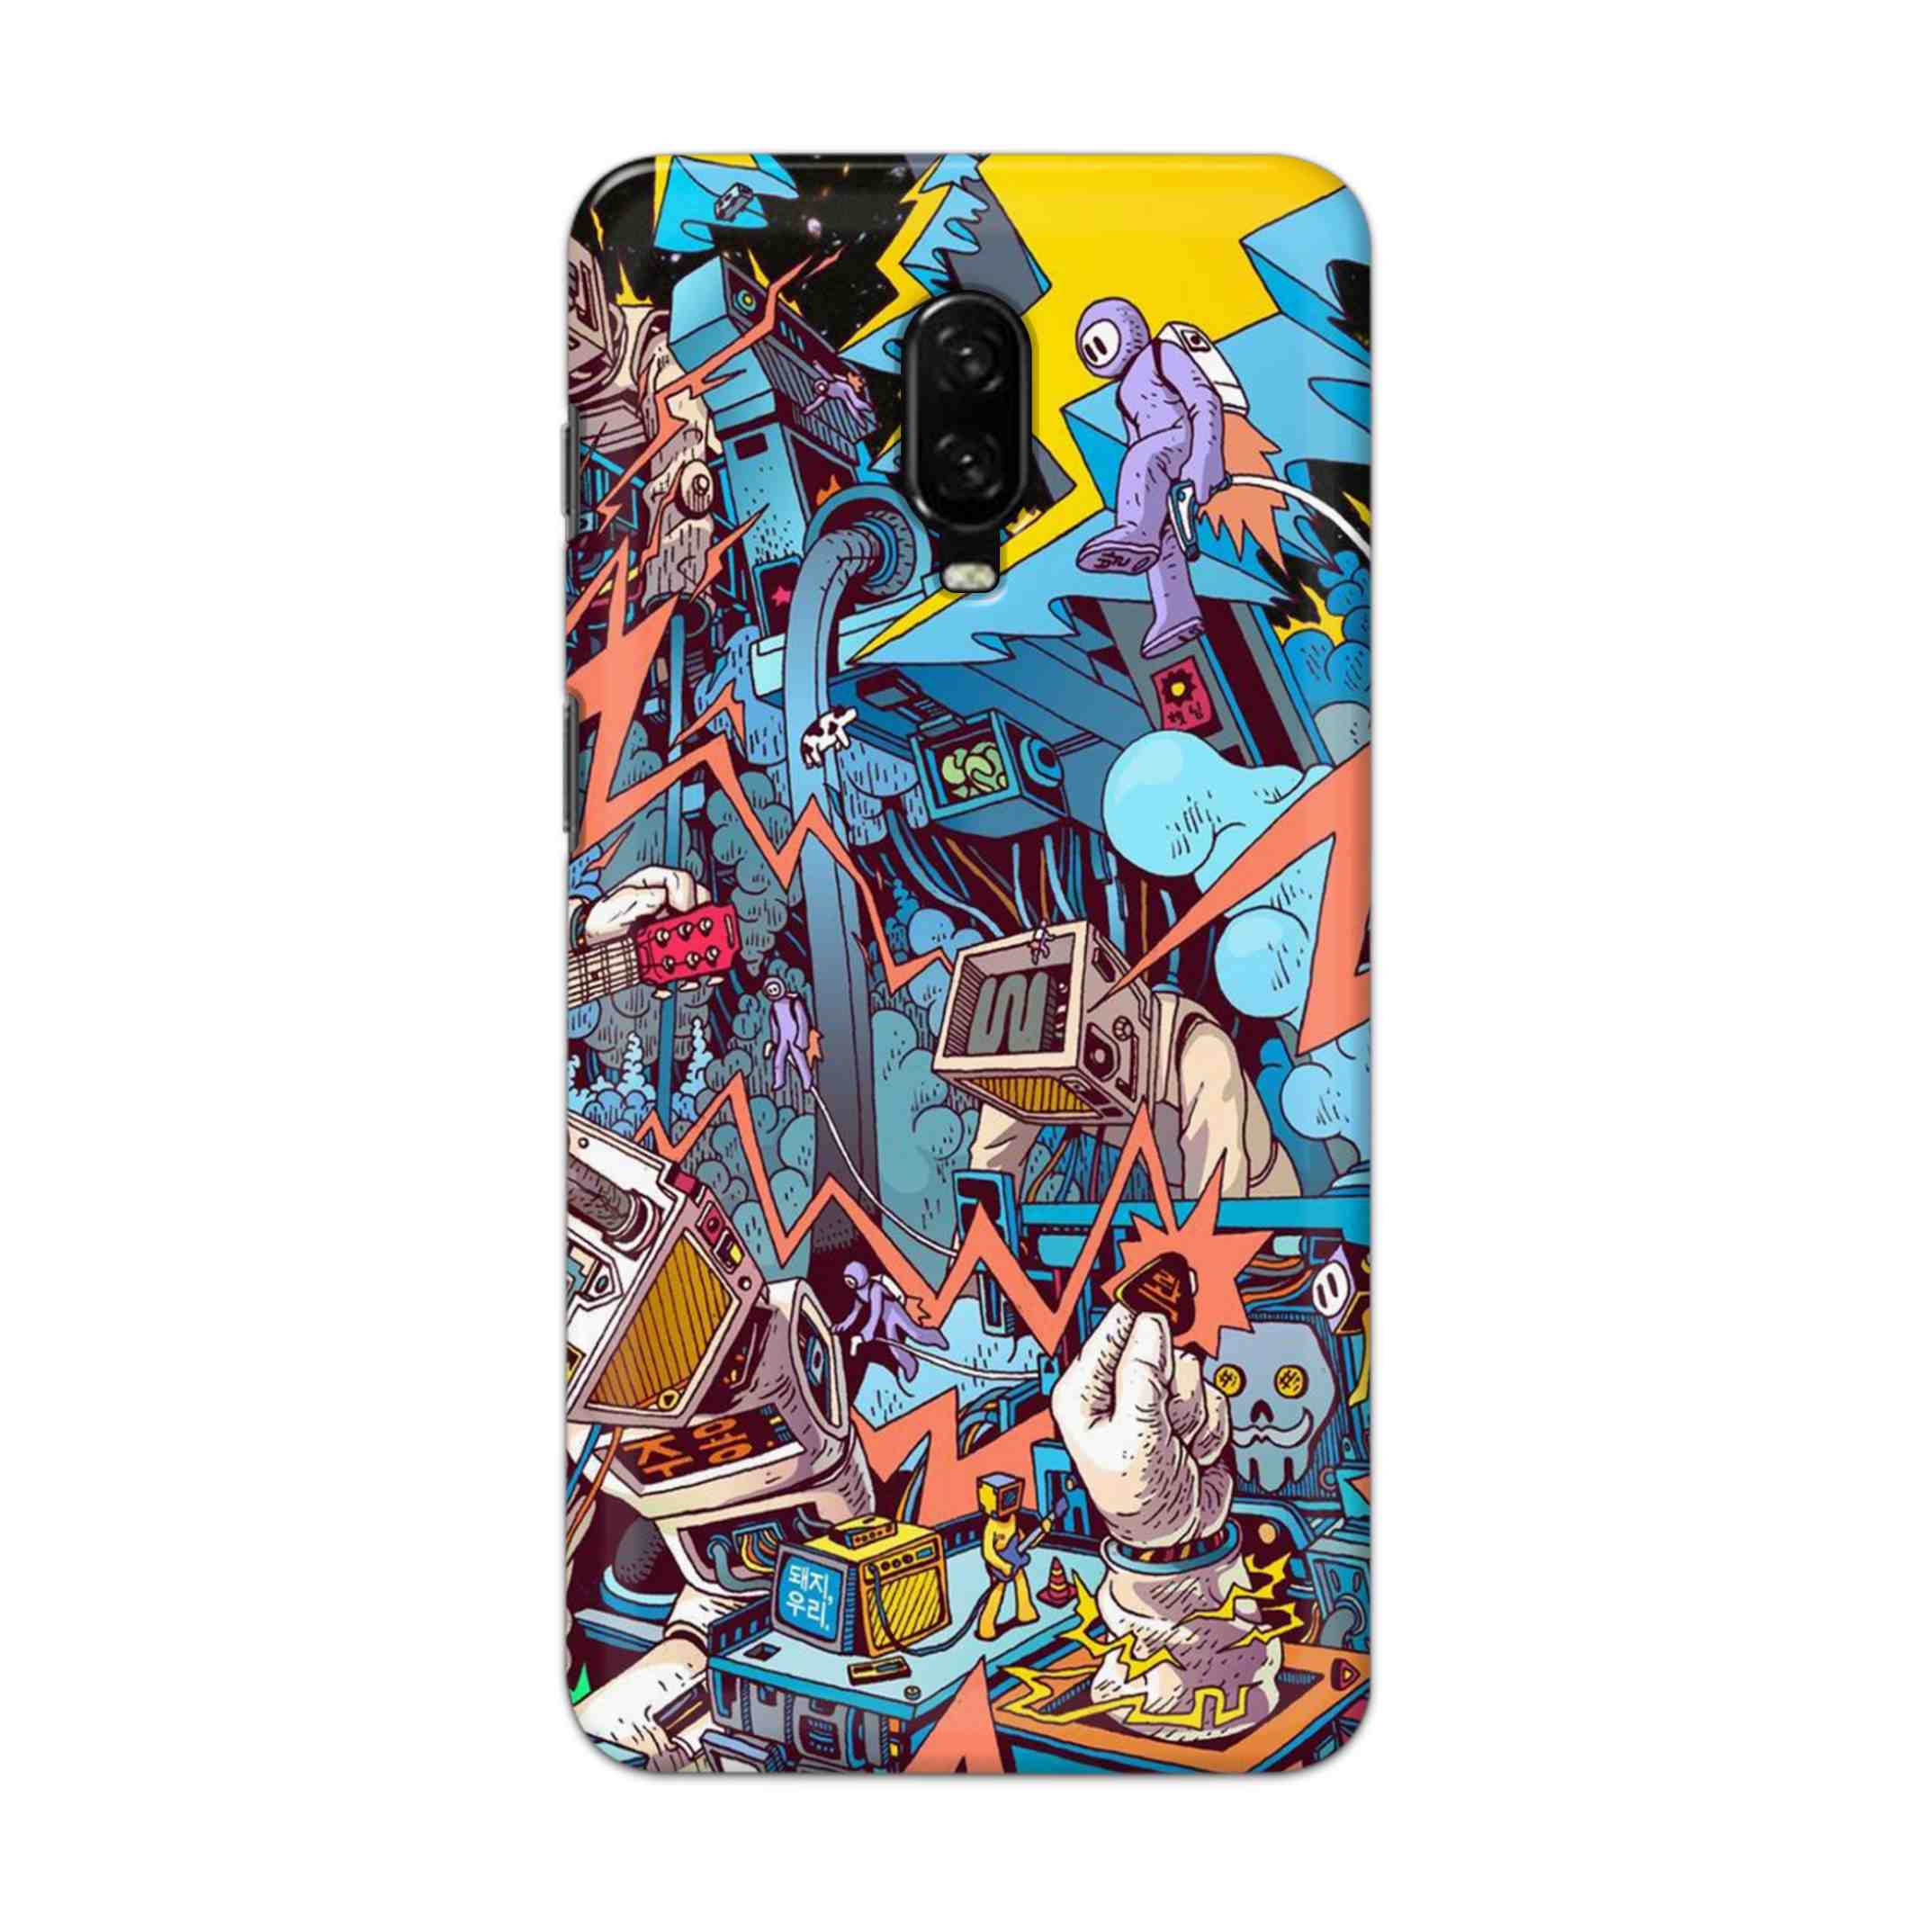 Buy Ofo Panic Hard Back Mobile Phone Case Cover For OnePlus 6T Online